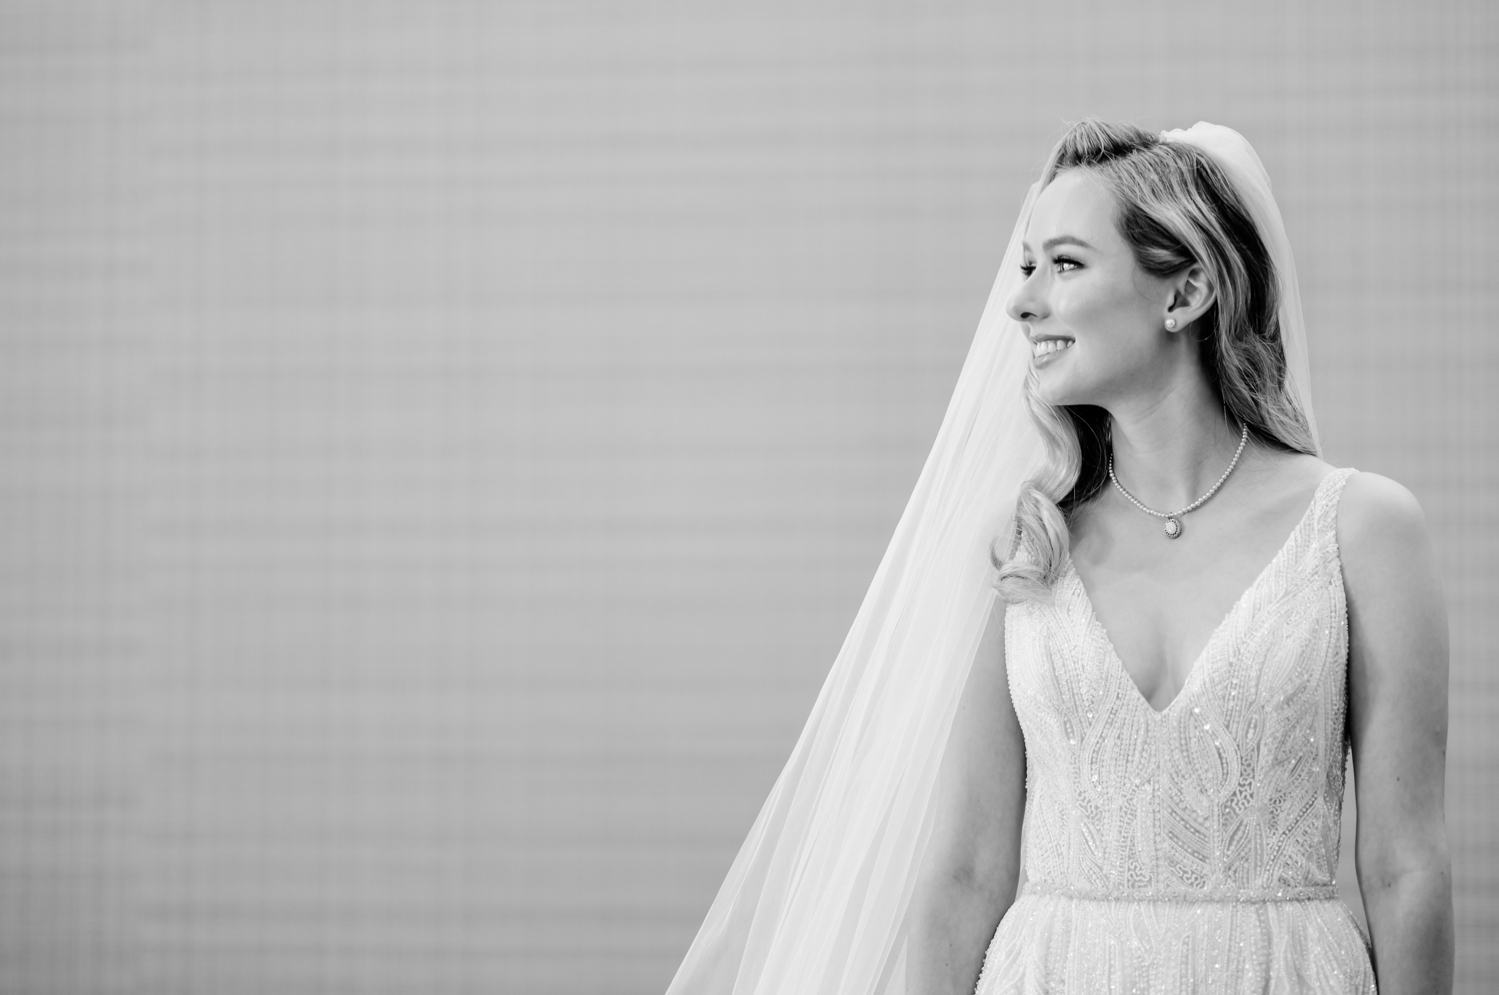 The bride is ready for the day and smiles in her dress and veil